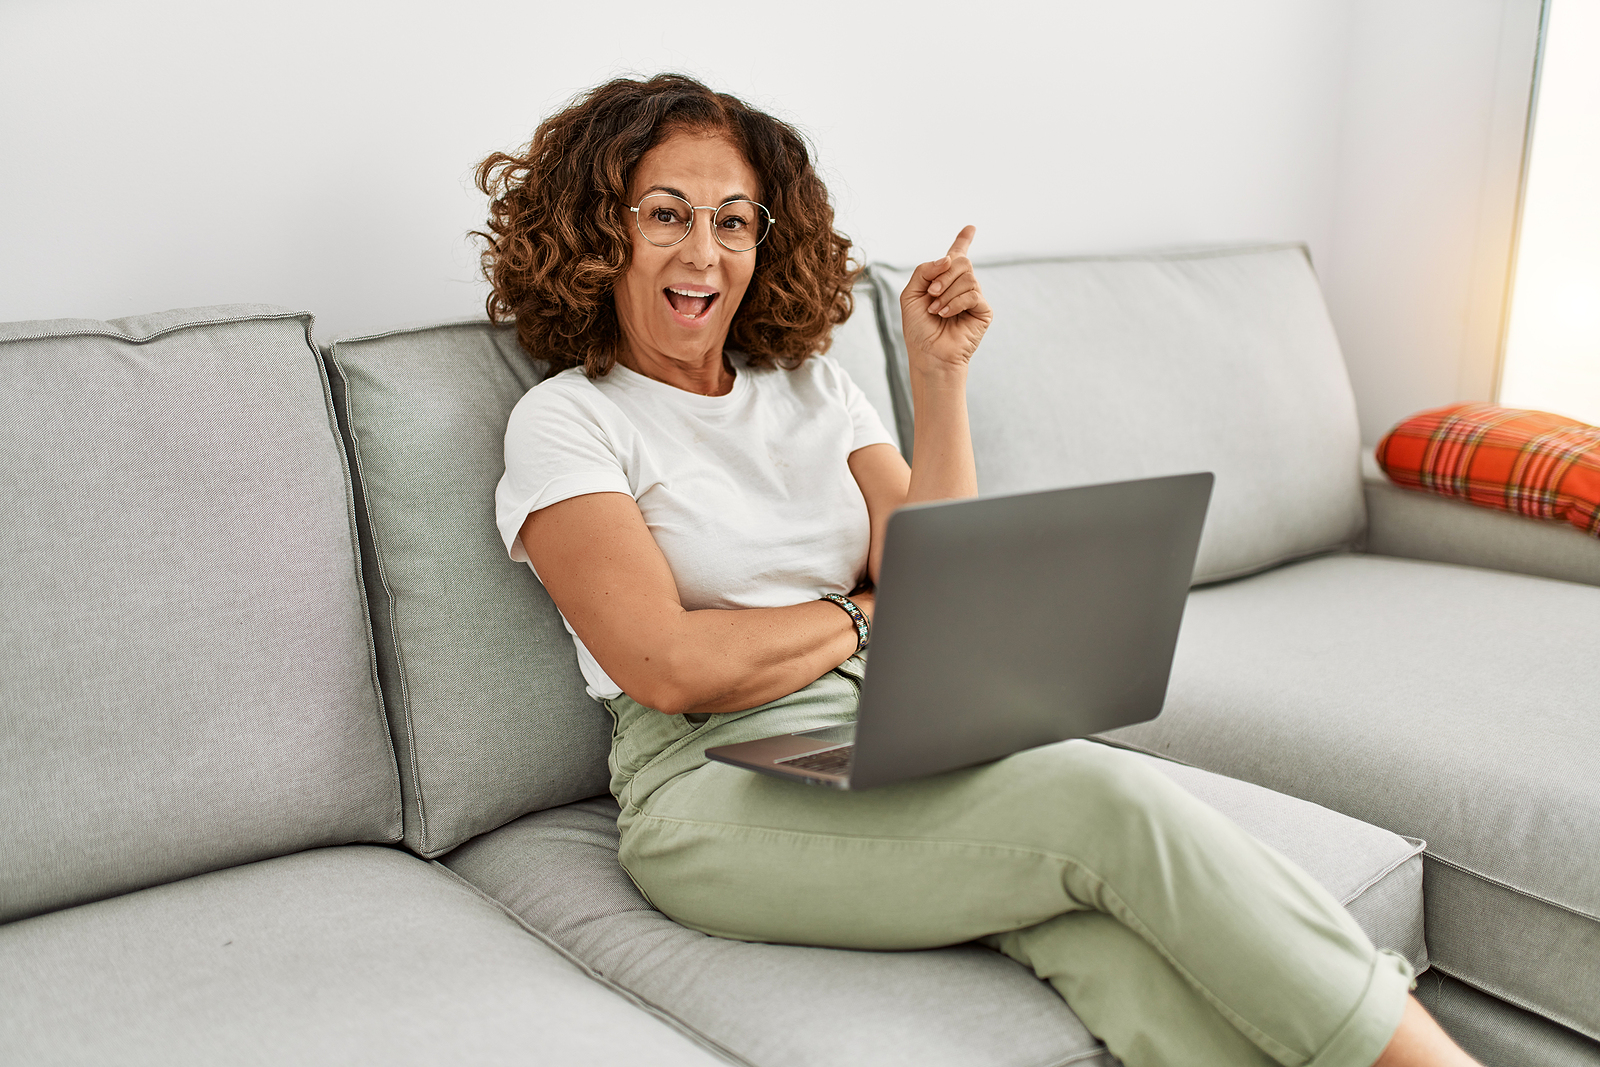 A middle aged latin woman smiles while working on her laptop on her couch with a finger pointing outwards.